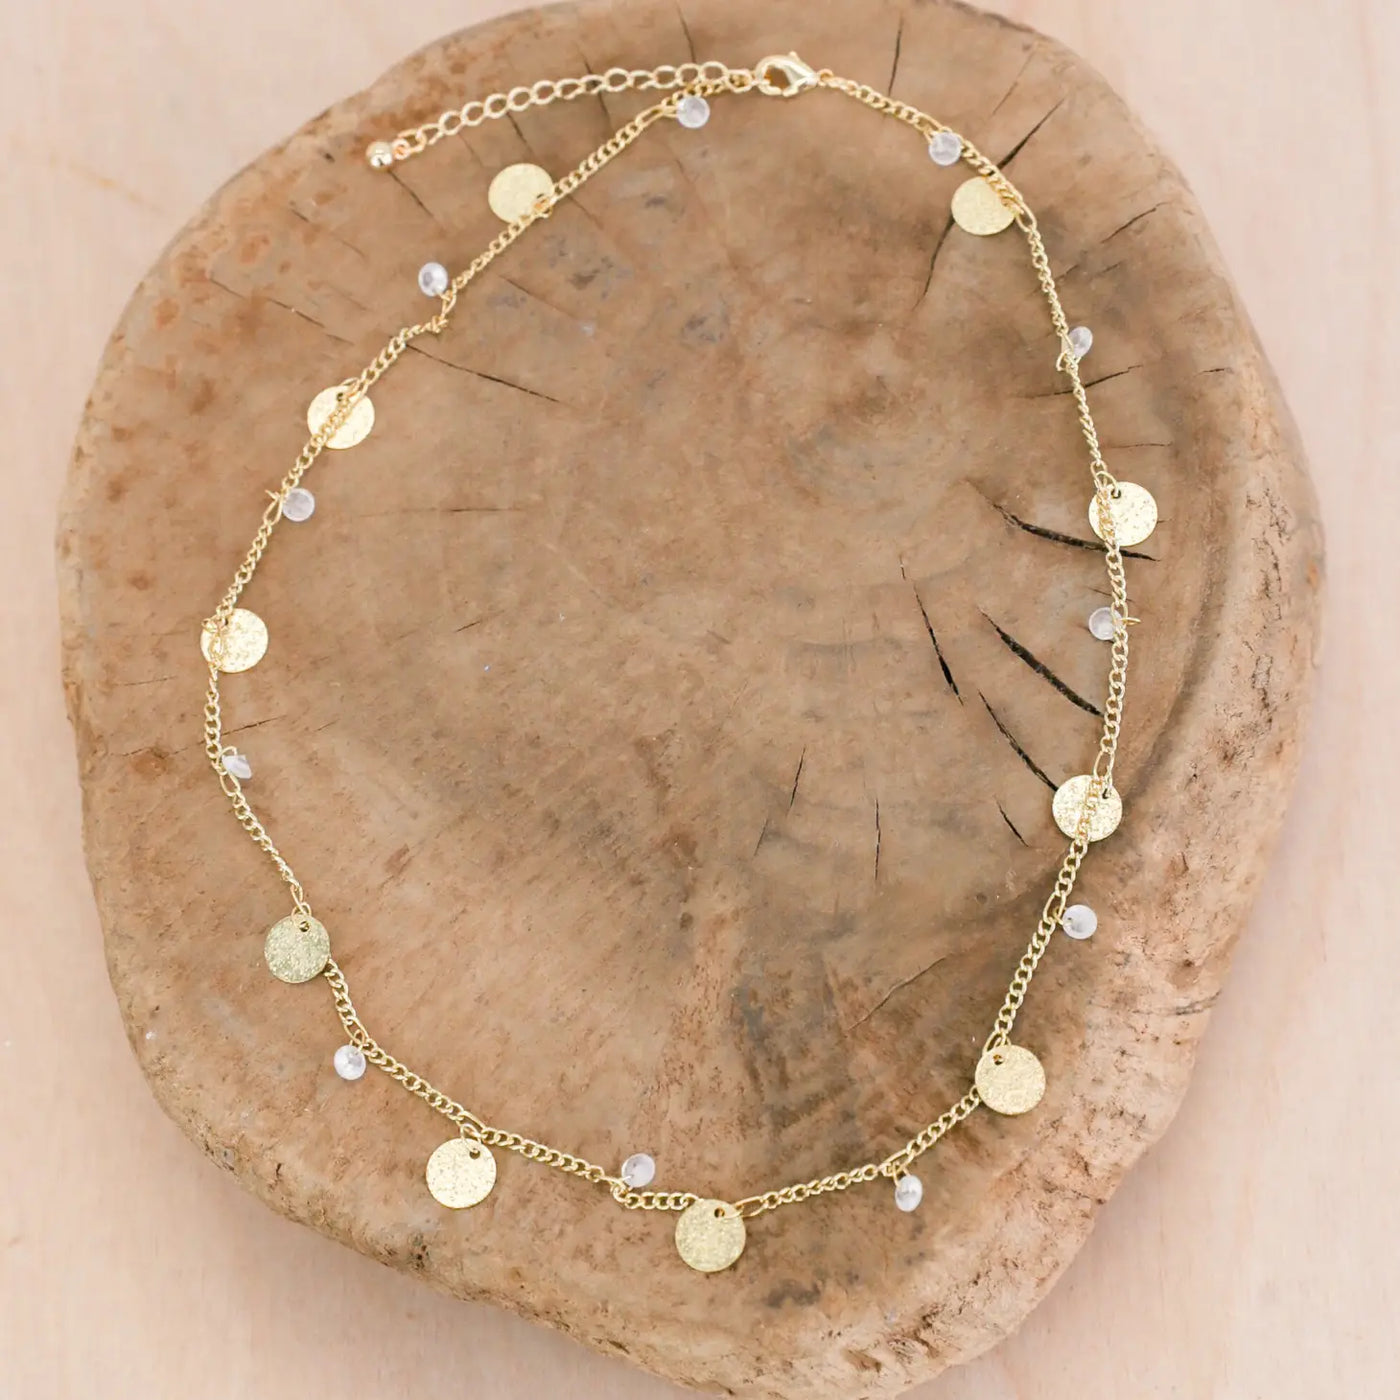 Bali Queen Gold Disk Crystal Chain Necklace - Simple Good